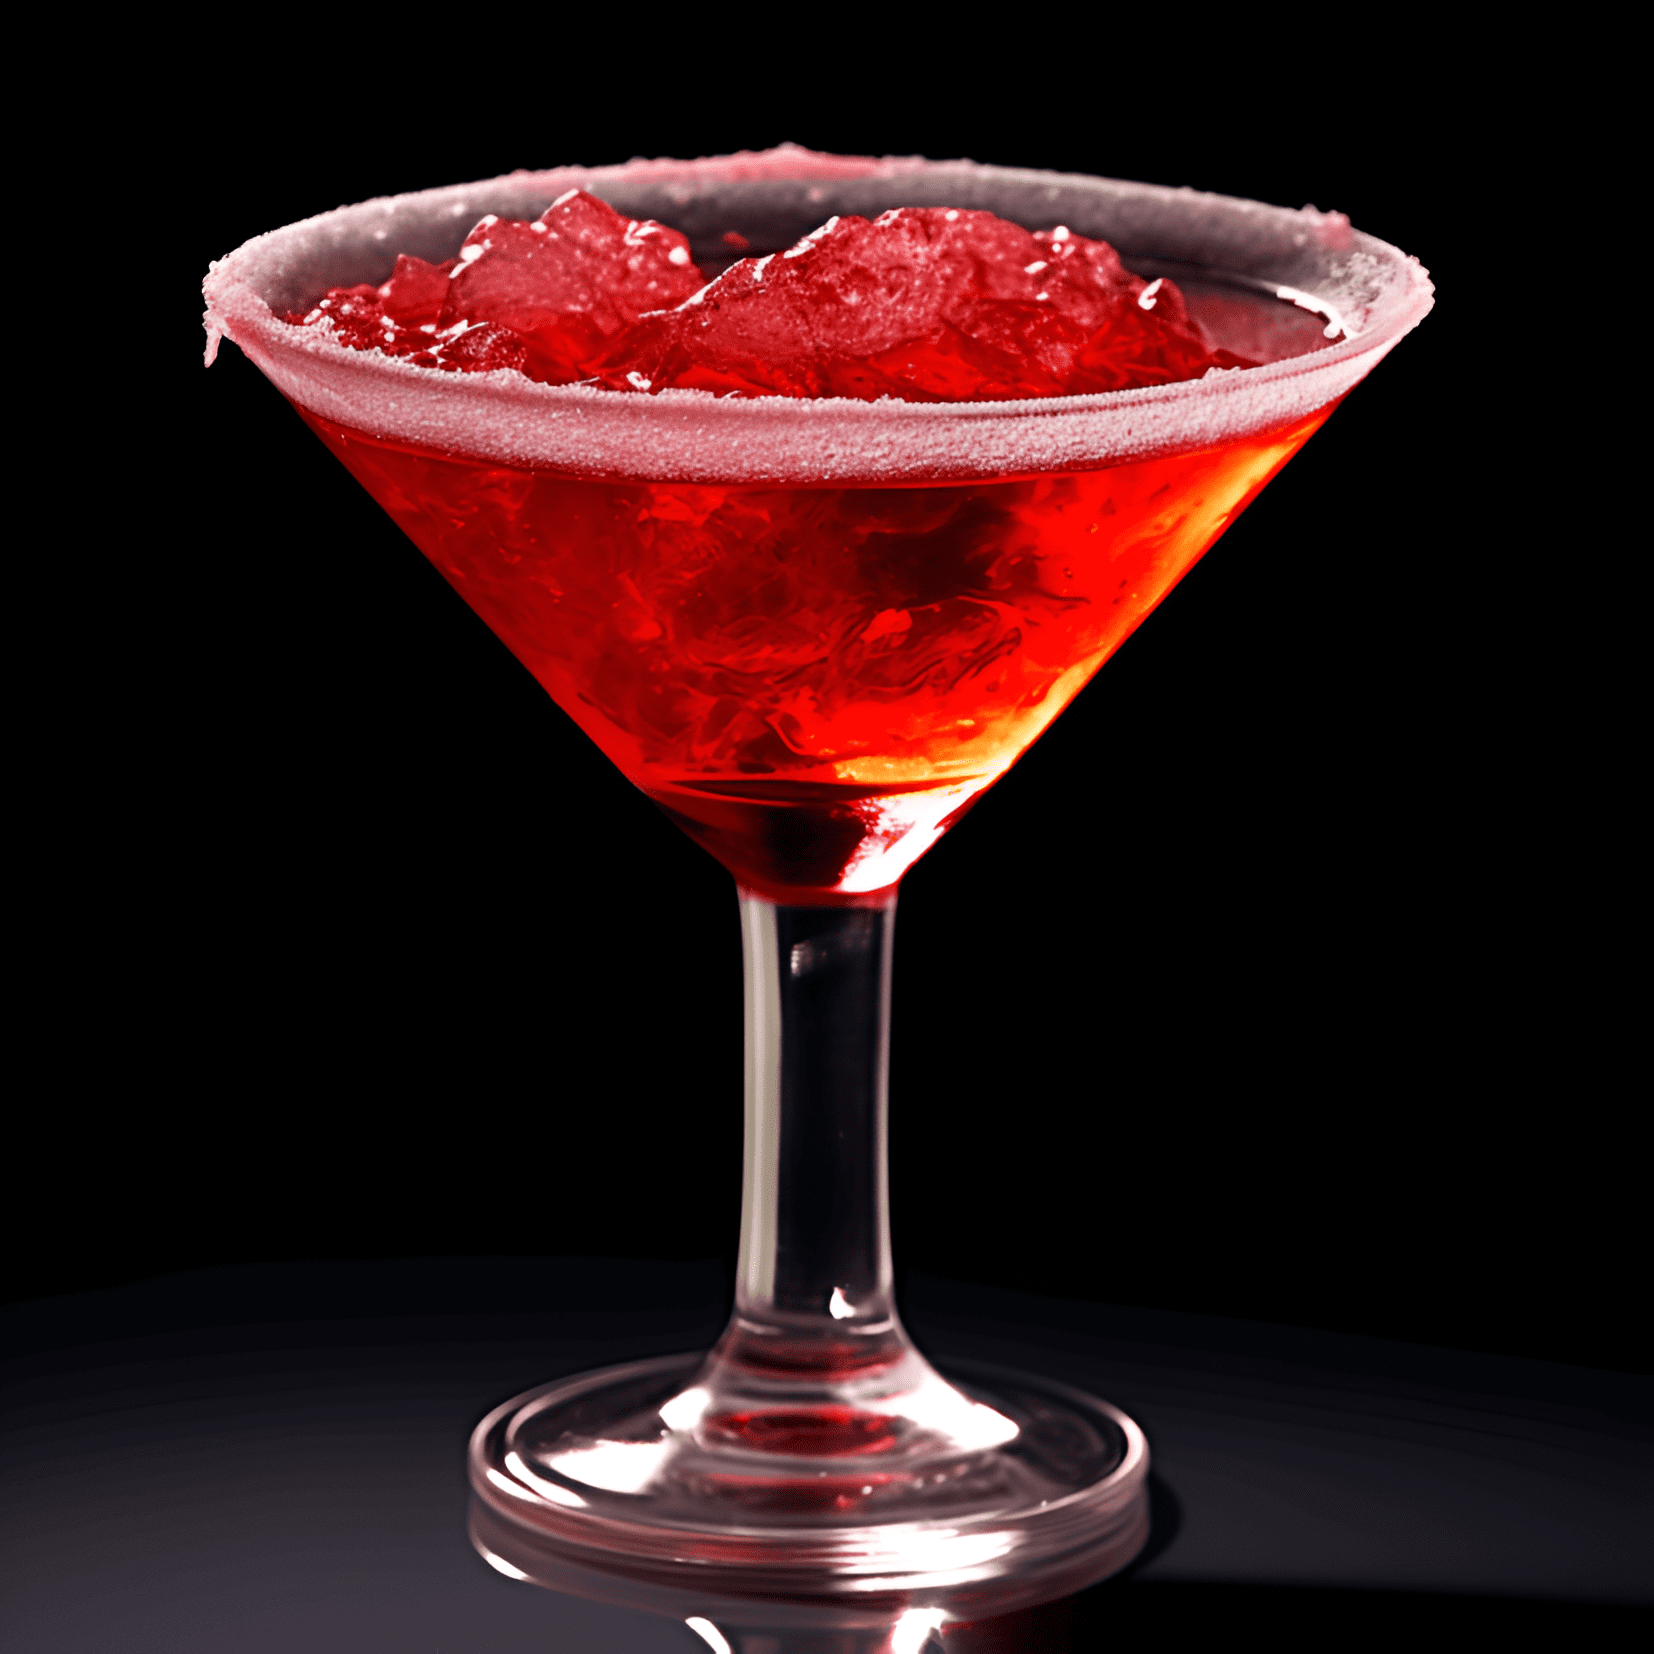 Pompeii Cocktail Recipe - The Pompeii cocktail has a complex and intriguing taste, with a perfect balance of sweet, sour, and bitter notes. It is strong and bold, yet smooth and refreshing.